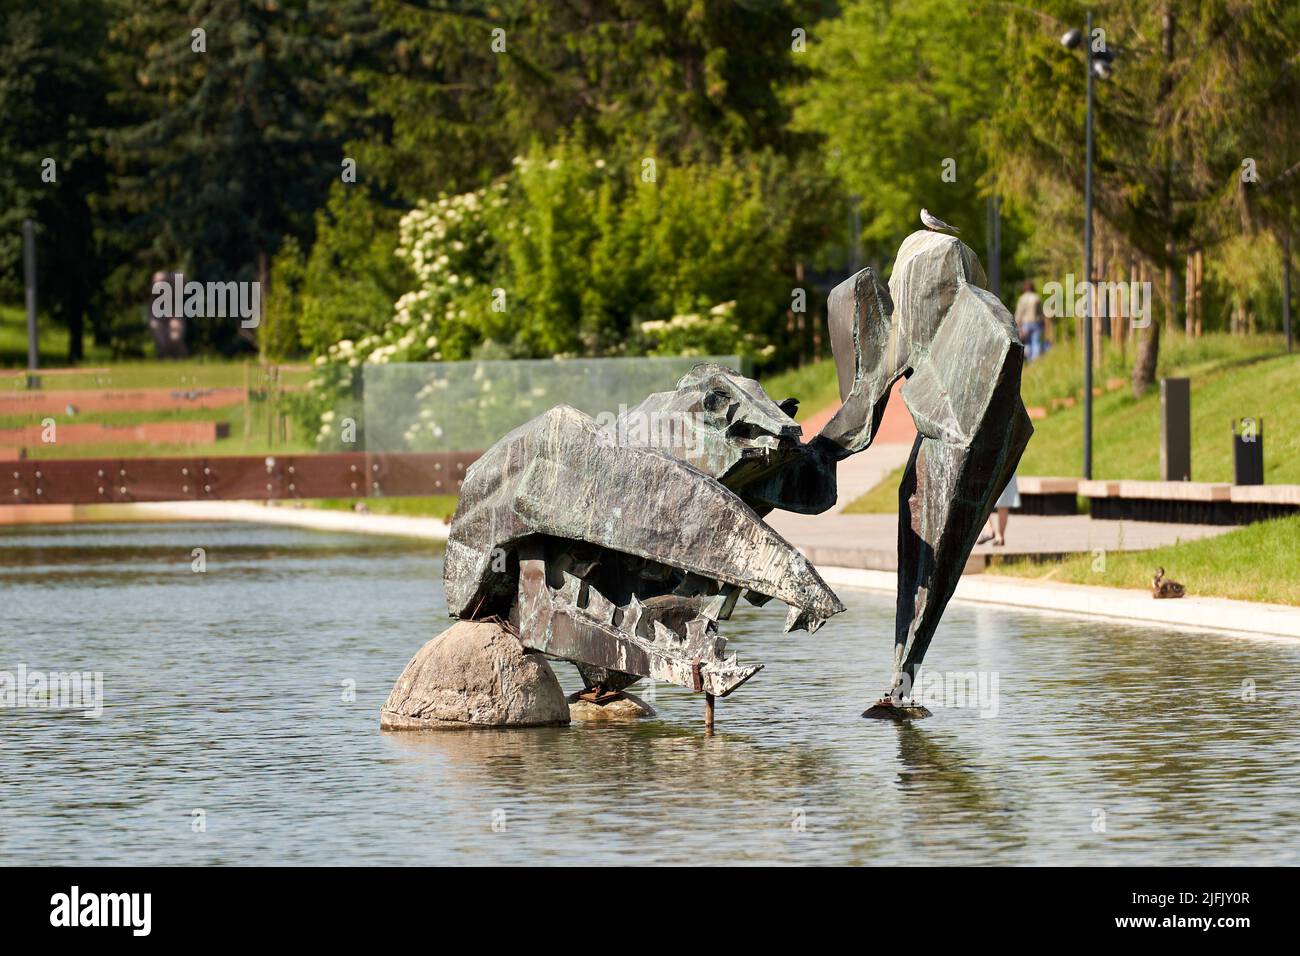 Symbol of Panevezys town in Lithuania: metal cancer sculpture - Old Riverbed Park Stock Photo